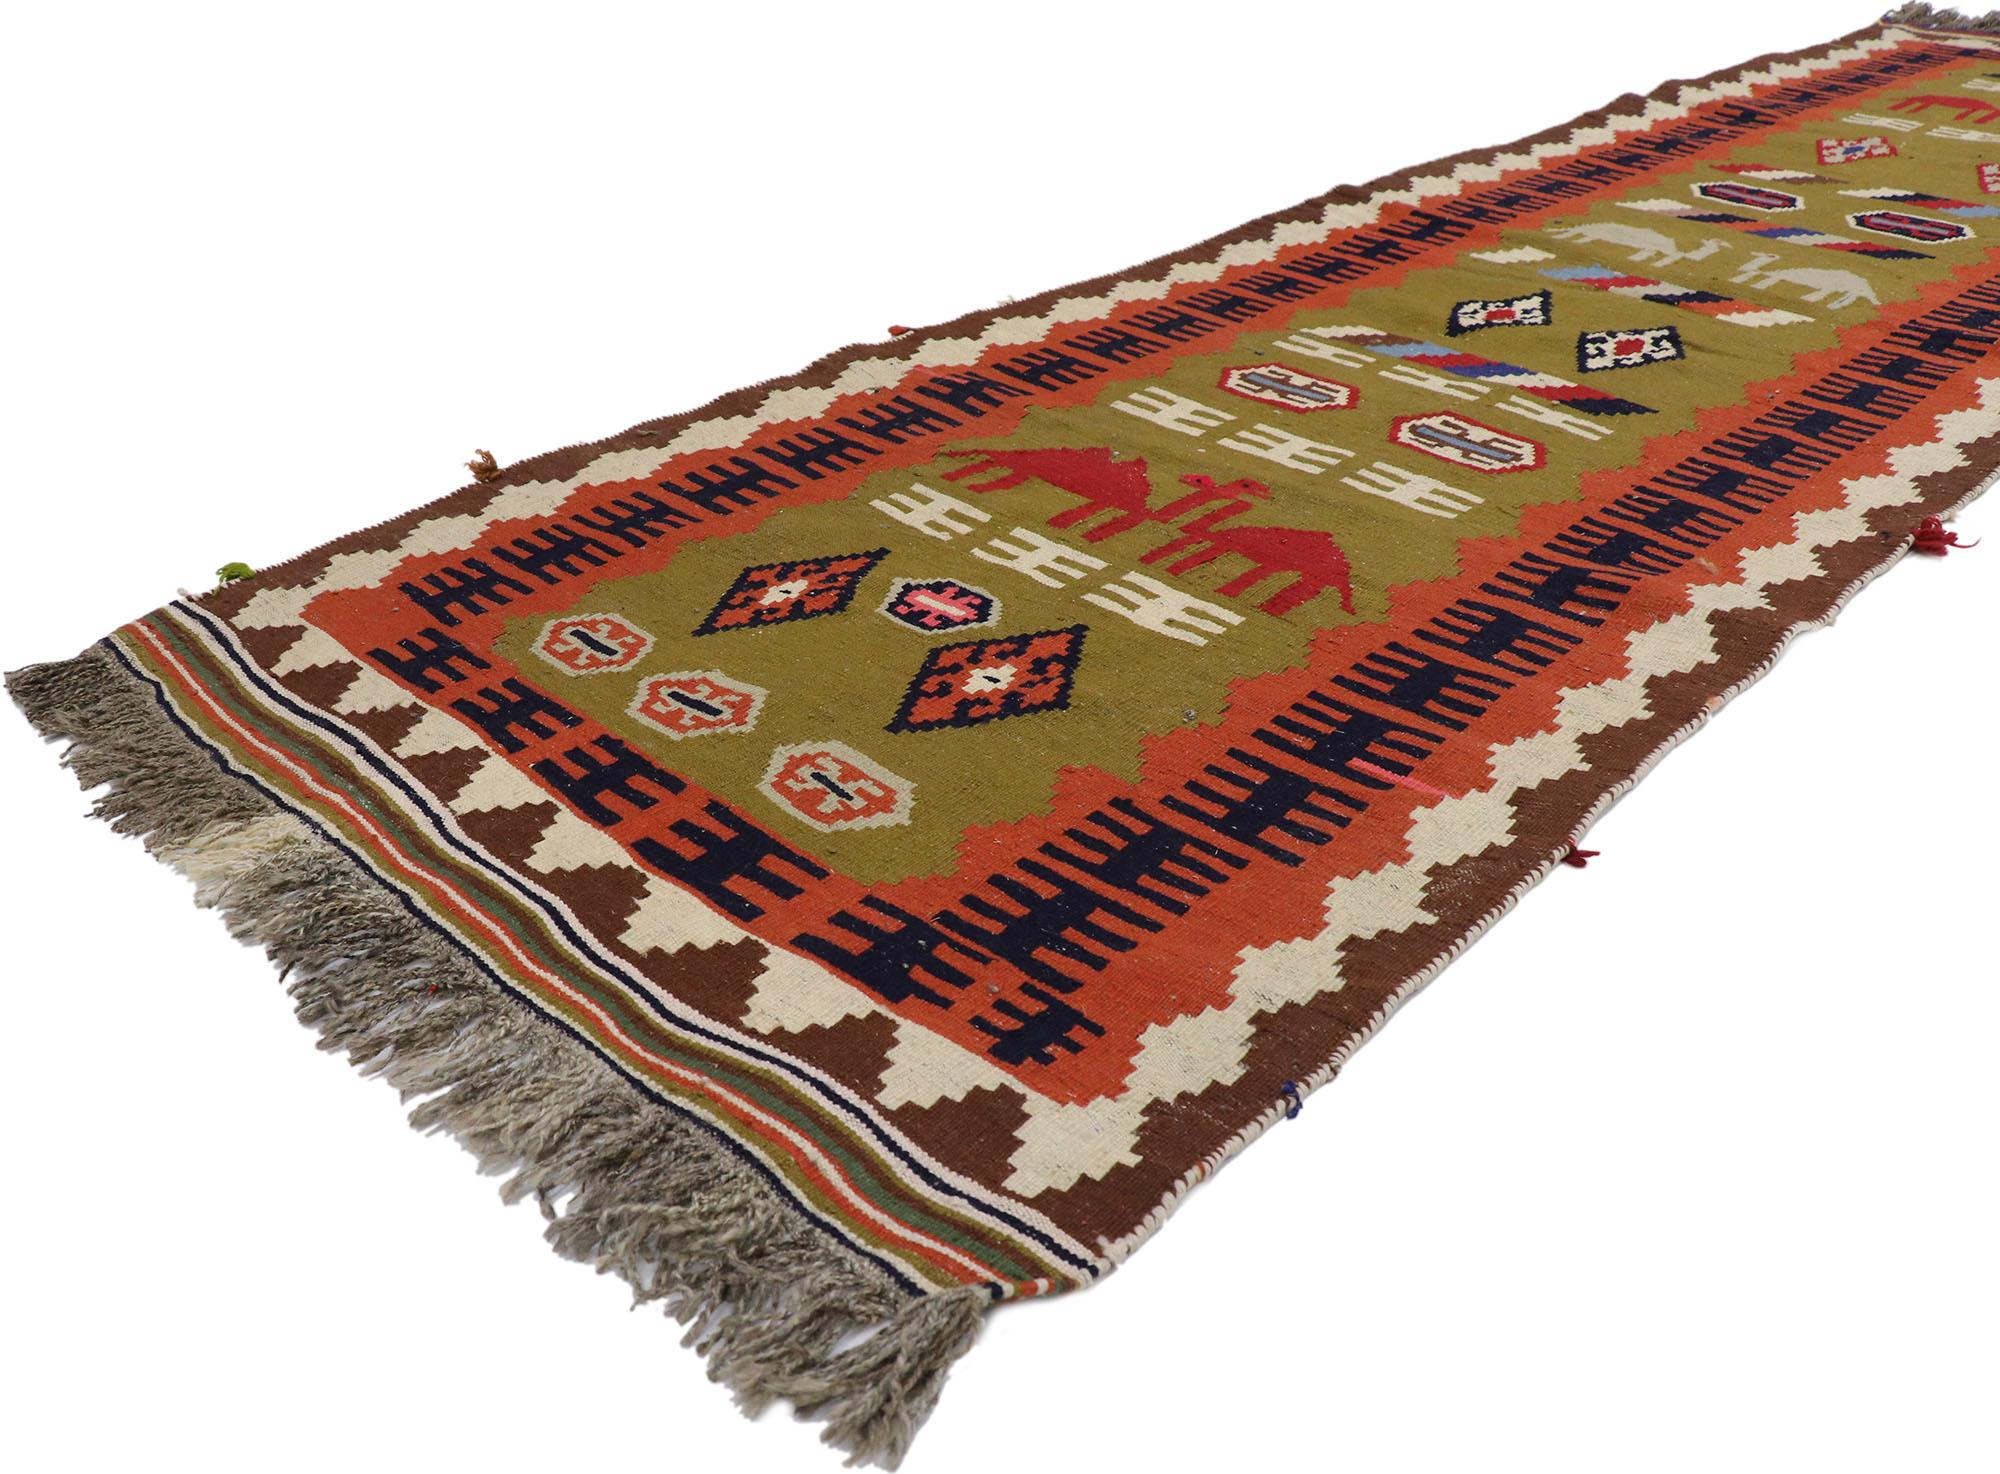 78042 Vintage Persian Shiraz Kilim Runner with Tribal Style 02'10 x 09'00. Full of tiny details and a bold expressive design combined with vibrant colors and tribal style, this hand-woven wool vintage Persian Shiraz kilim runner is a captivating